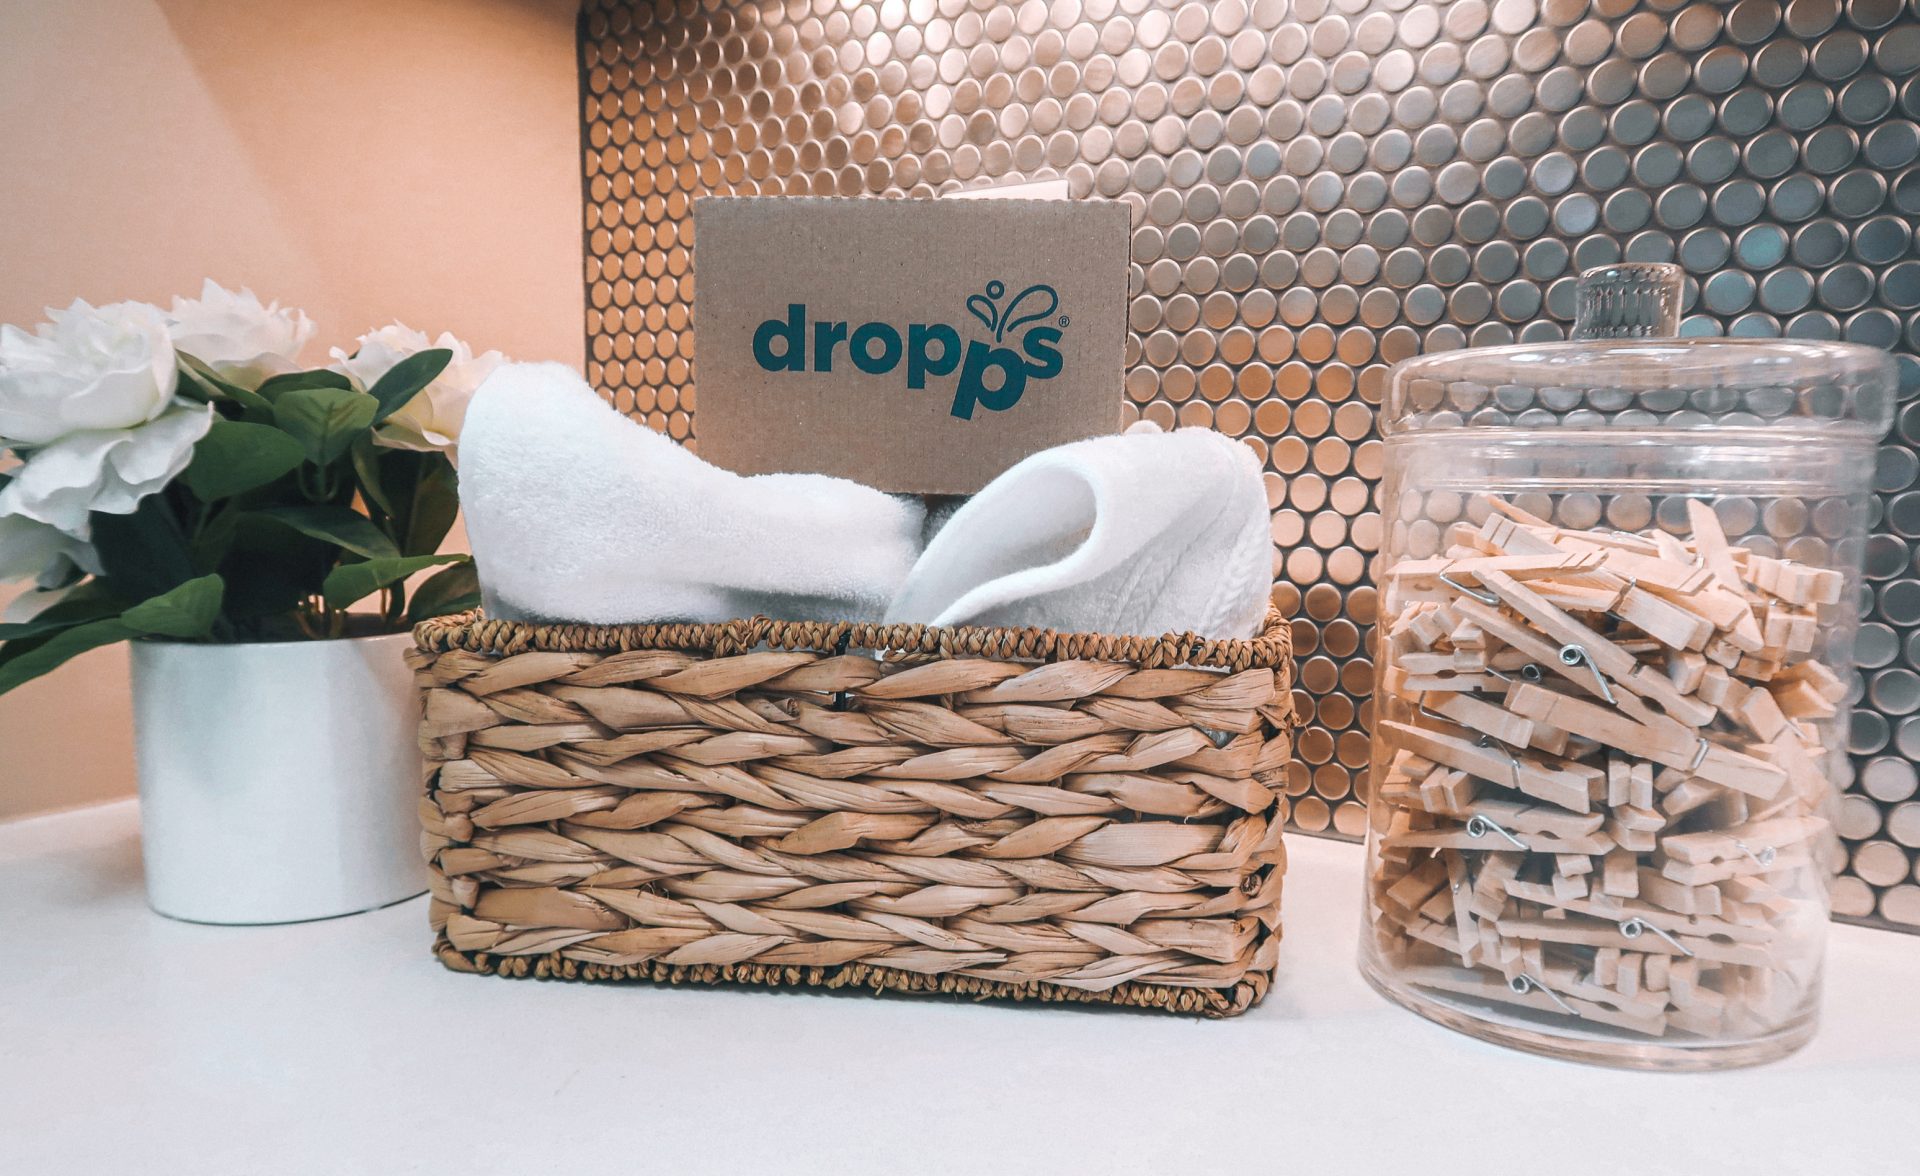 dropps, detergent, eco-friendly, sustainable, better for you, 2020, be better, healthier, organic, lavender, laundry, home cleaning, laundry day, dryer balls, dish soap